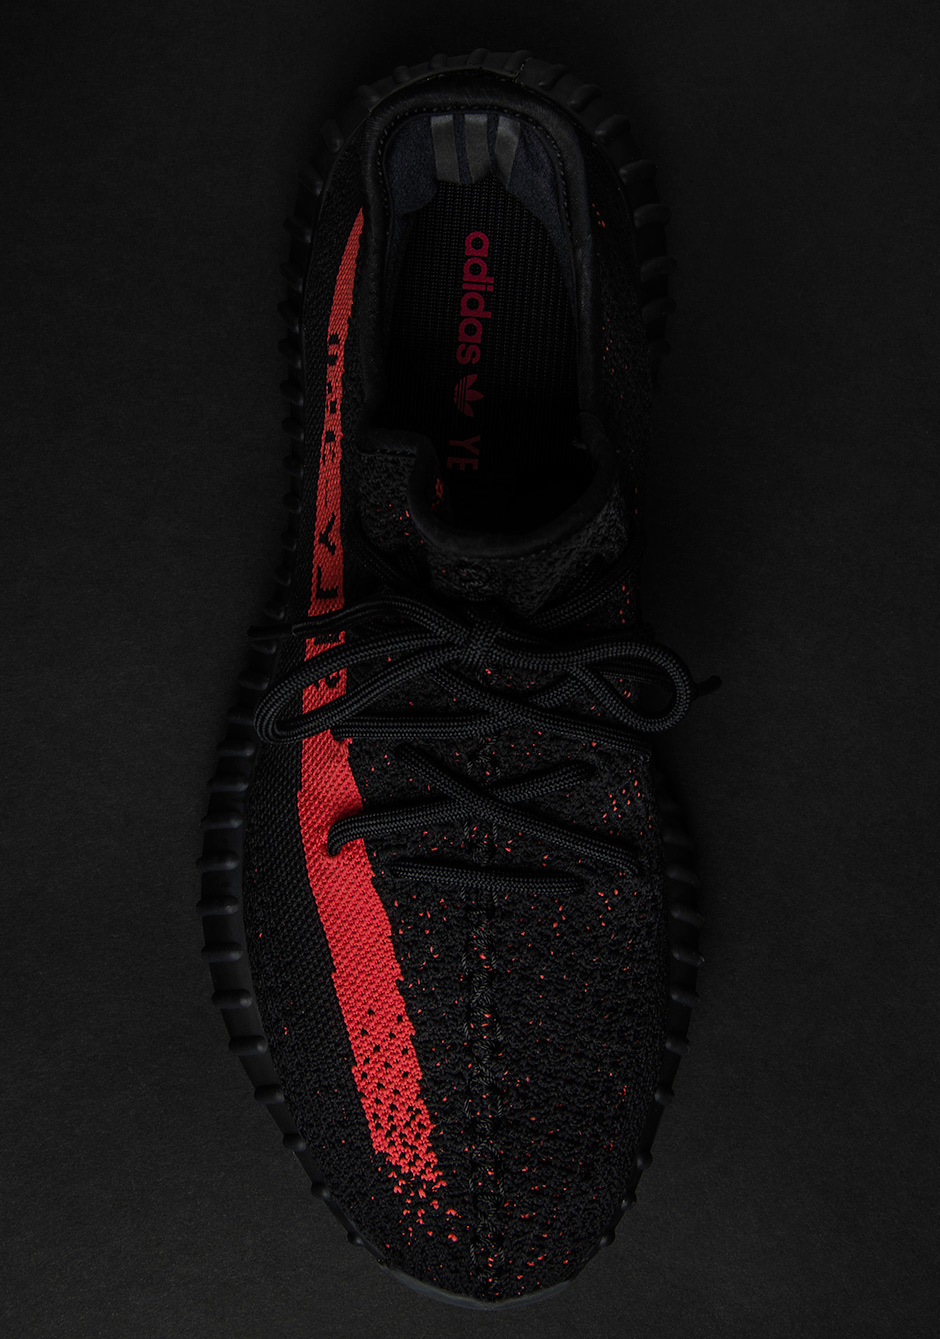 With Black Friday and the Red striped Yeezy Boost 350 V2 BY9612 